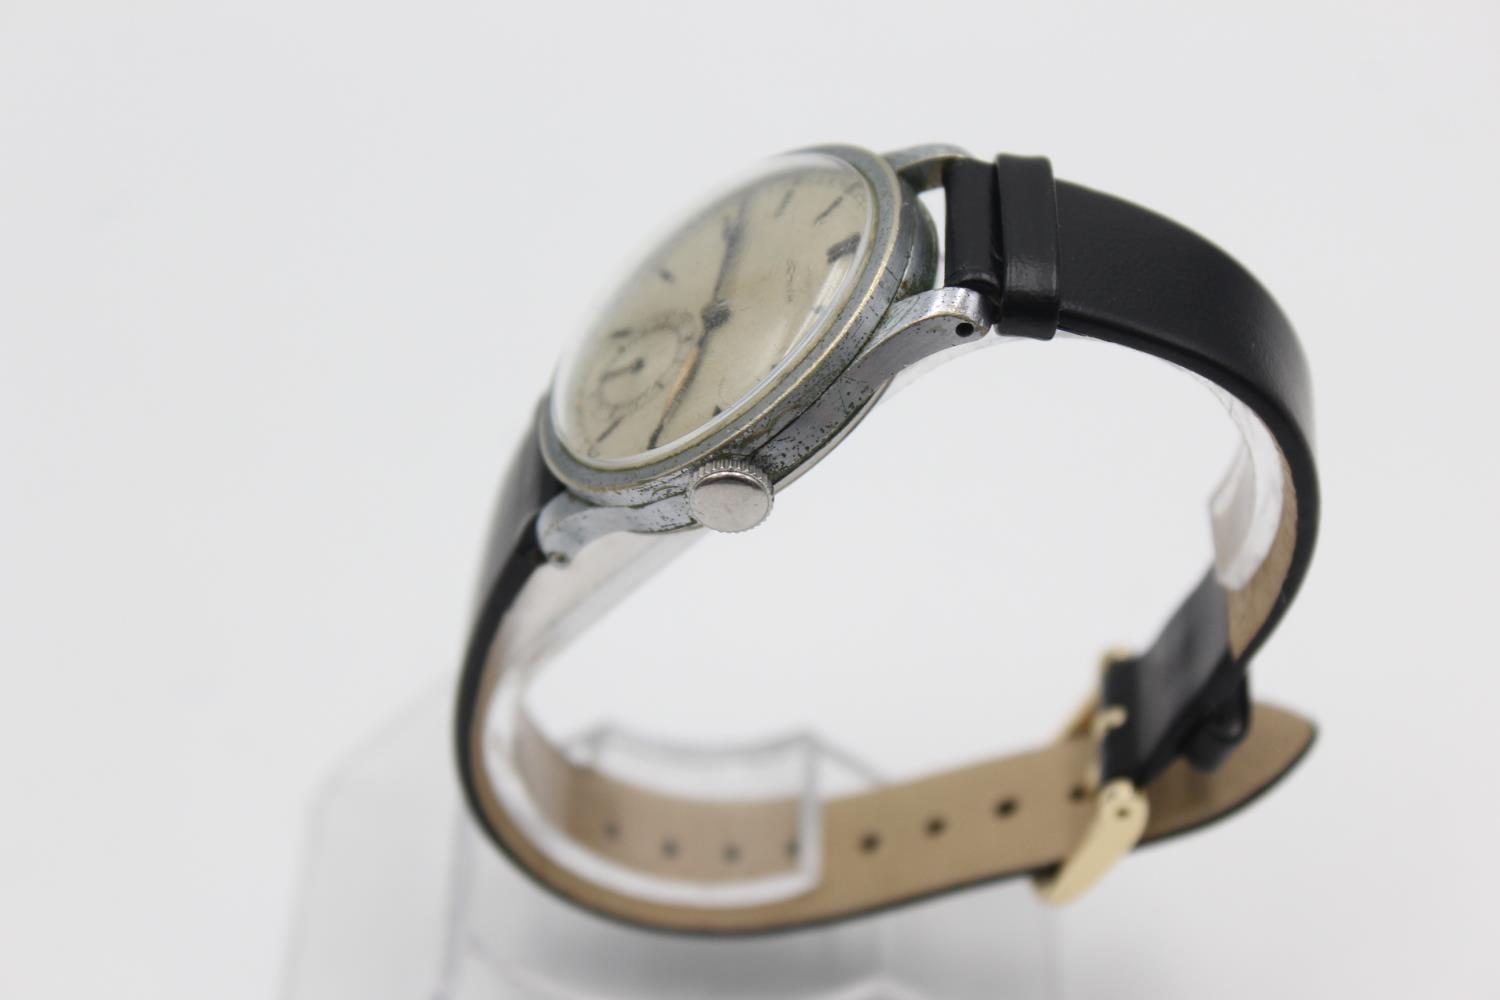 Vintage Gents ZENITH Military Style WRISTWATCH Hand-Wind WORKING Vintage Gents ZENITH Military Sty - Image 3 of 4